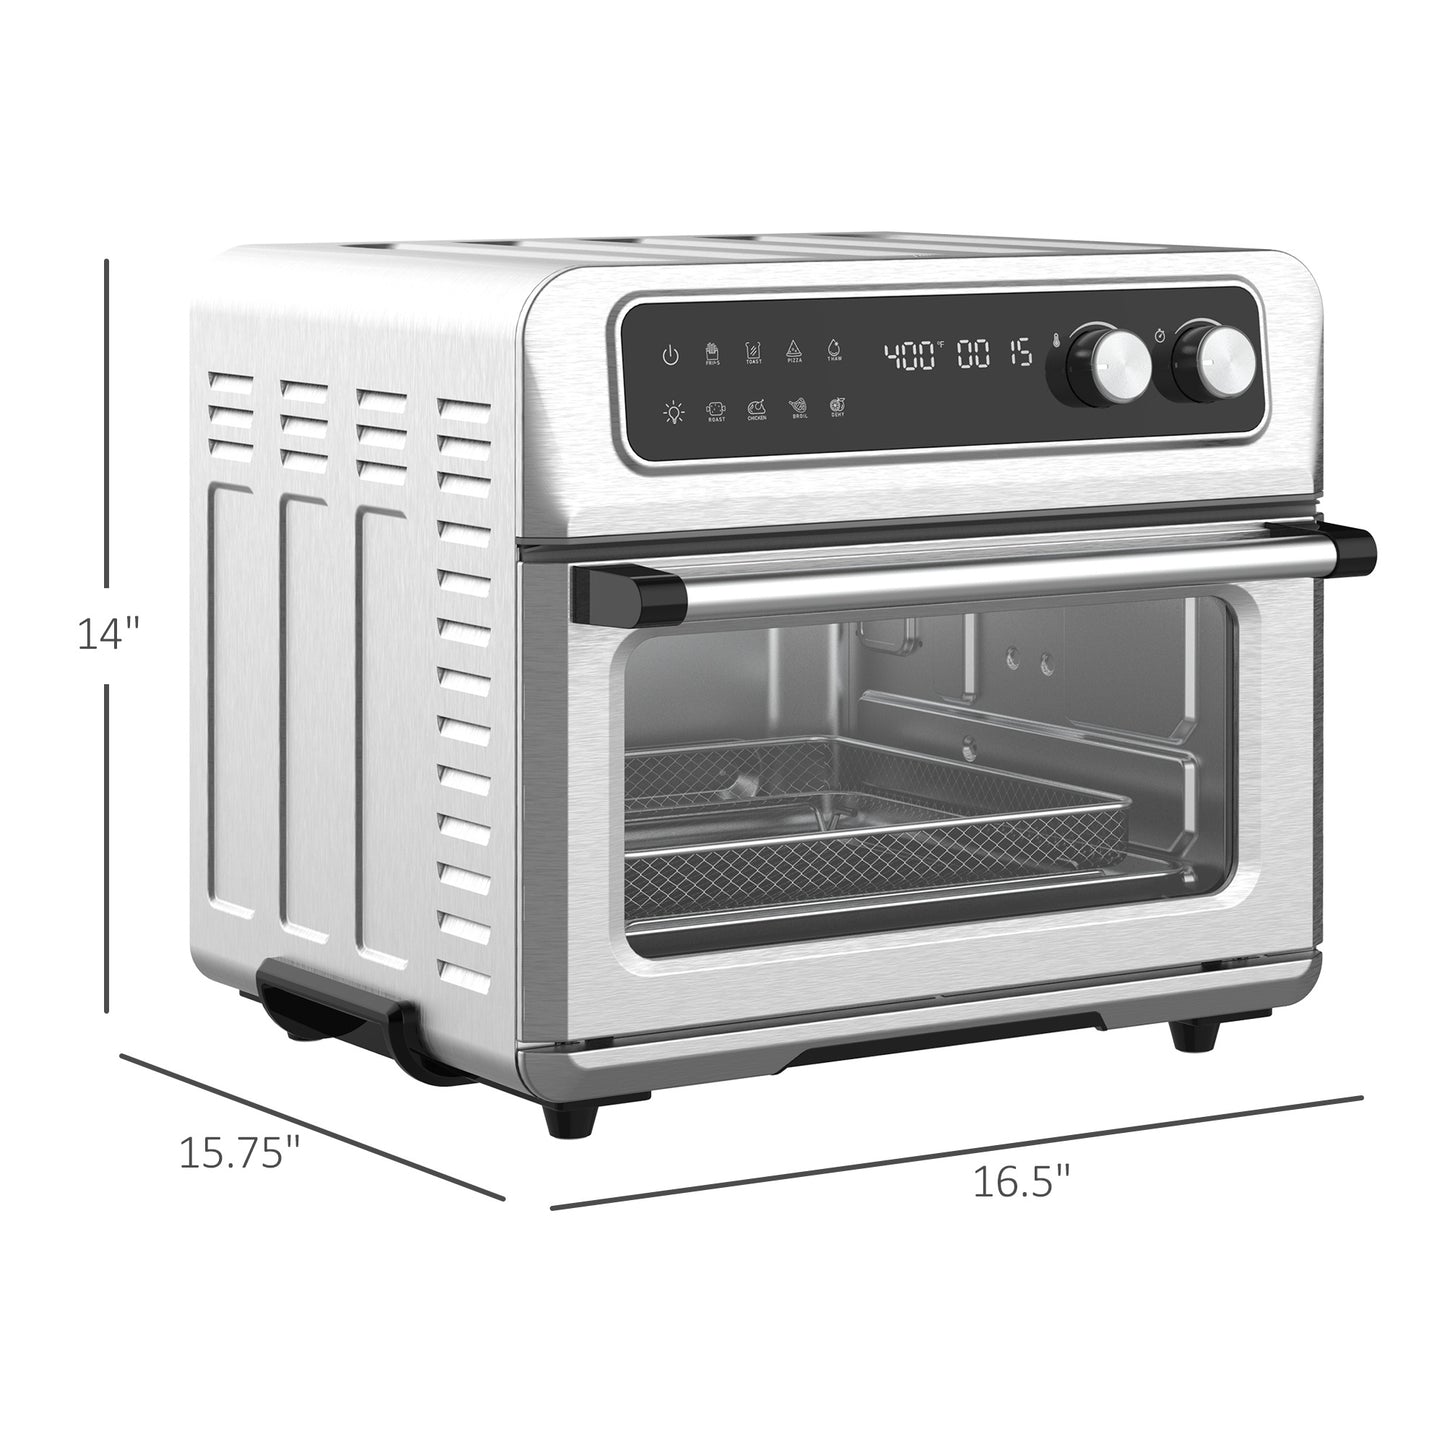 Air Fryer Toaster Oven, 21QT 8-In-1 Convection Oven Countertop, Broil, Toast, Dehydrator, Thaw and Air Fry, Accessories Included, 1800W, Stainless Steel Finish